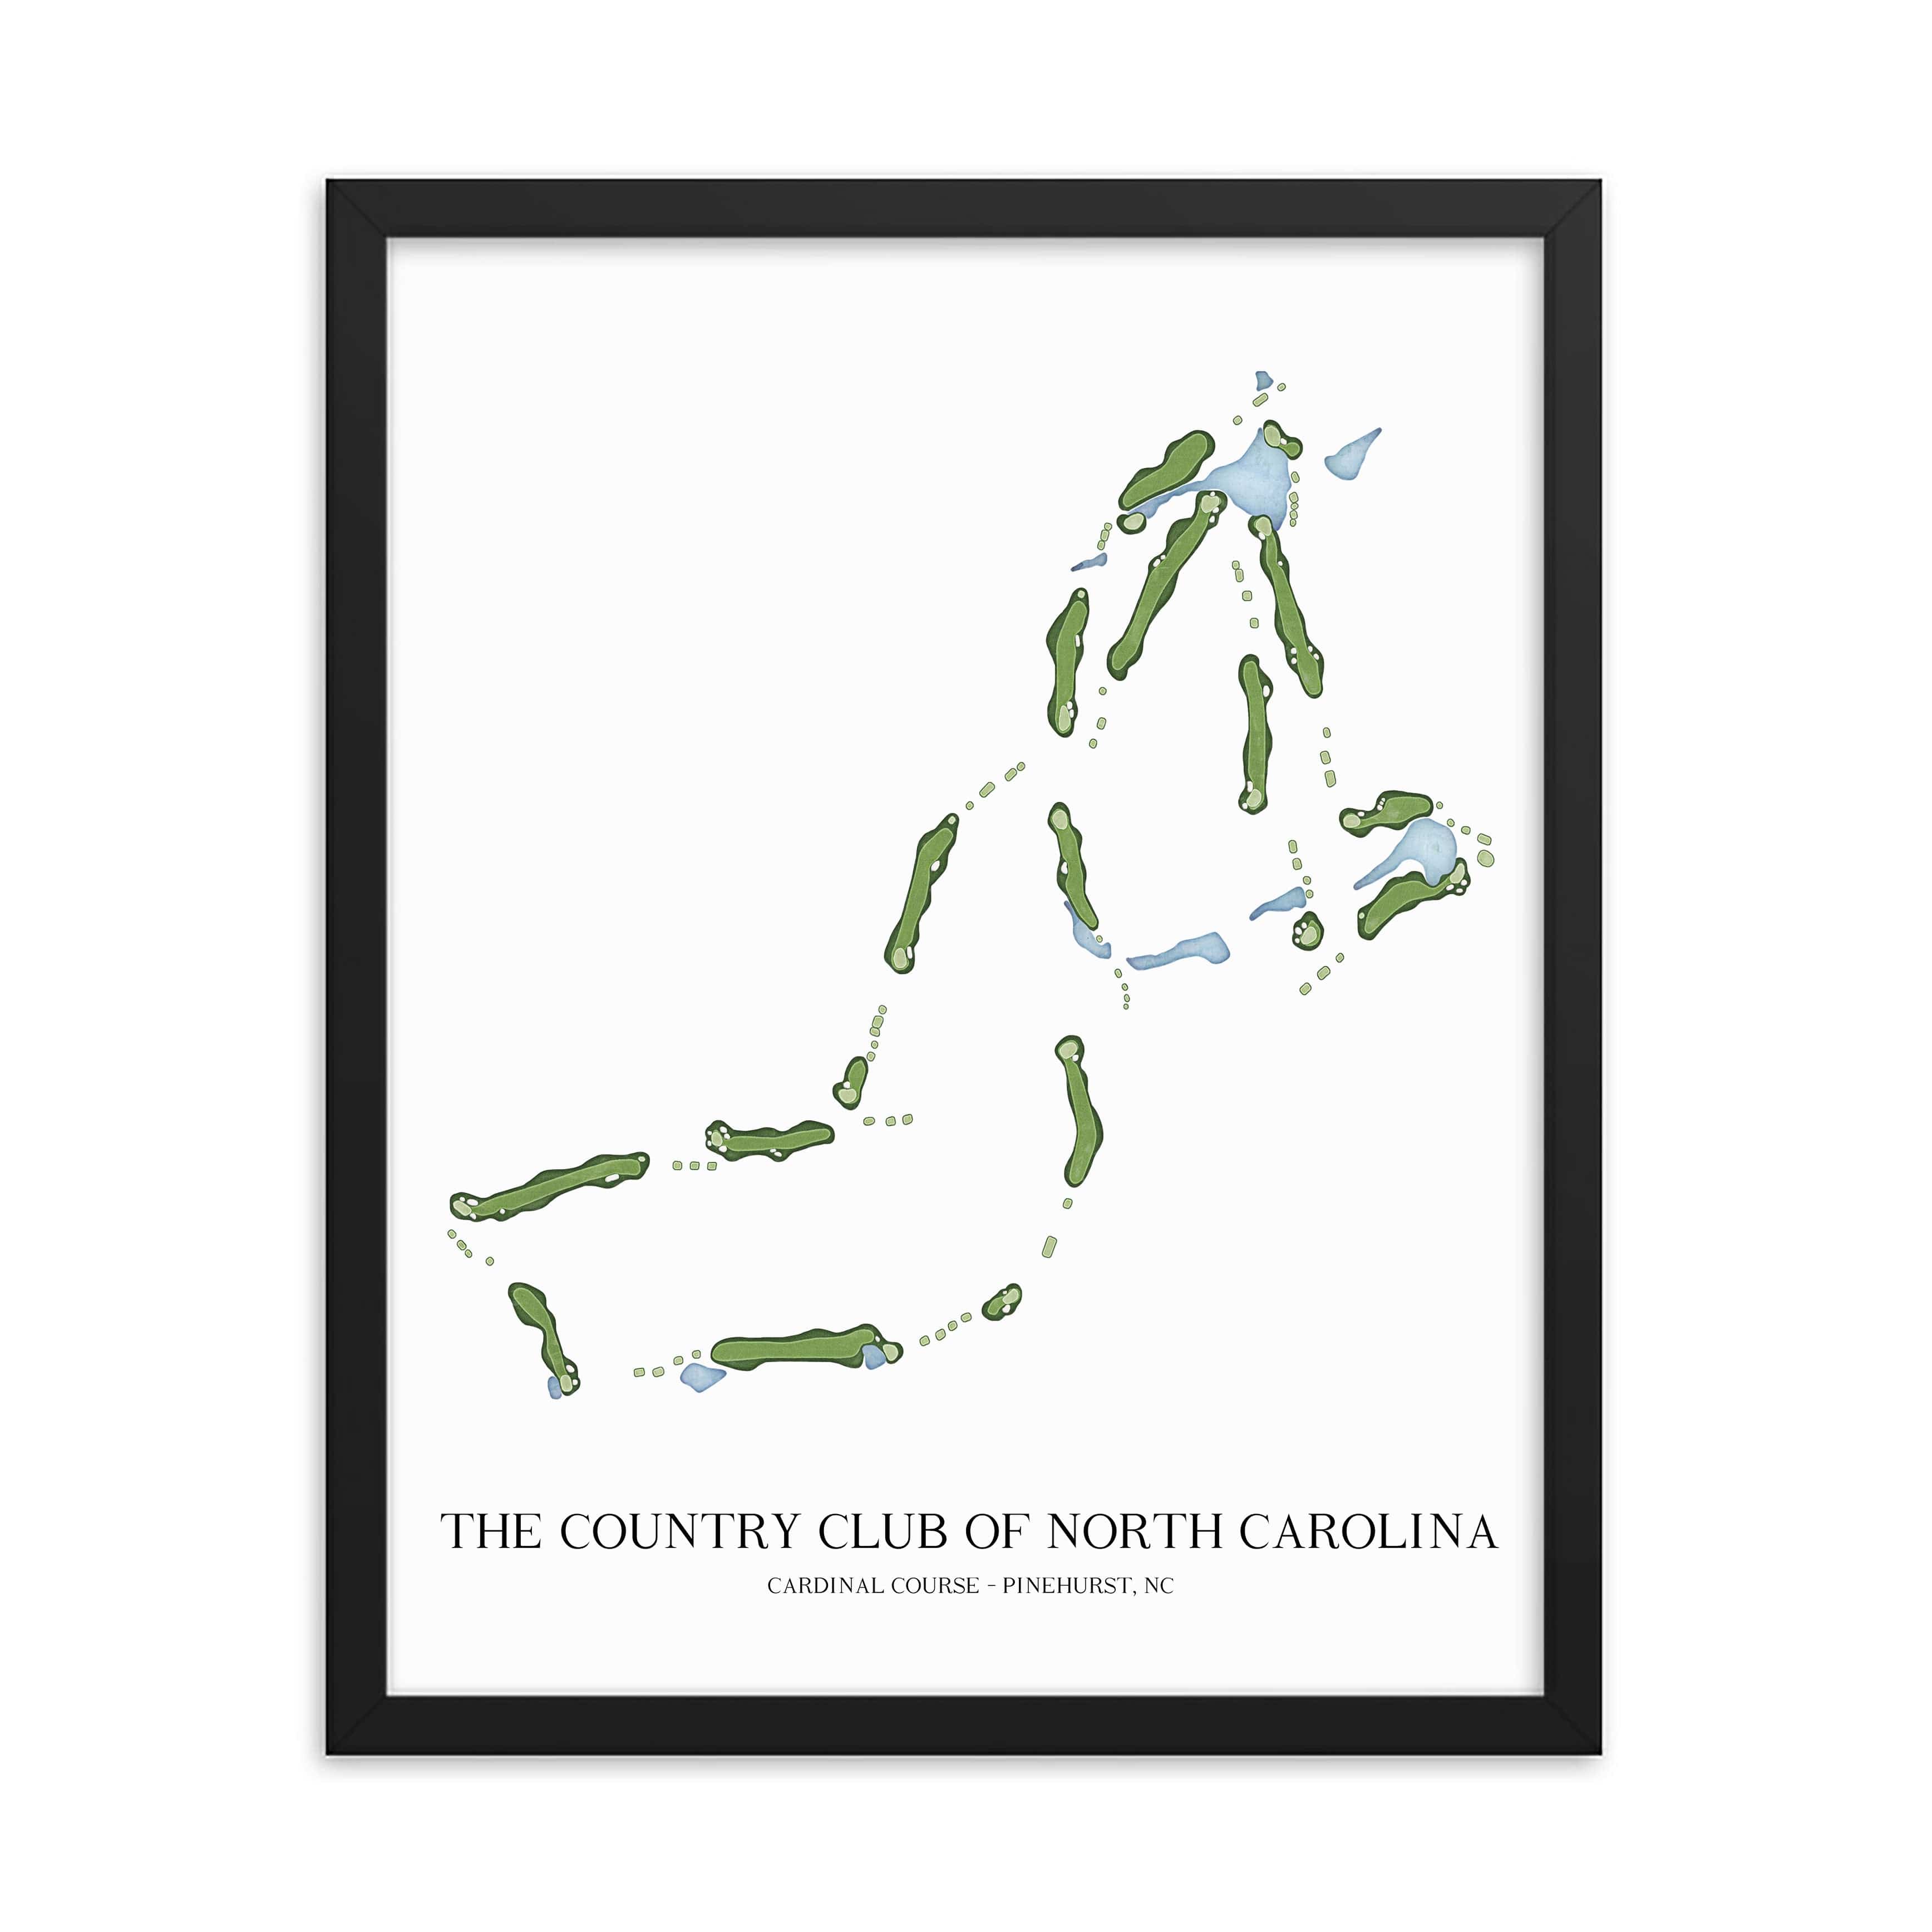 The 19th Hole Golf Shop - Golf Course Prints -  The Country Club of North Carolina - Cardinal Golf Course Map